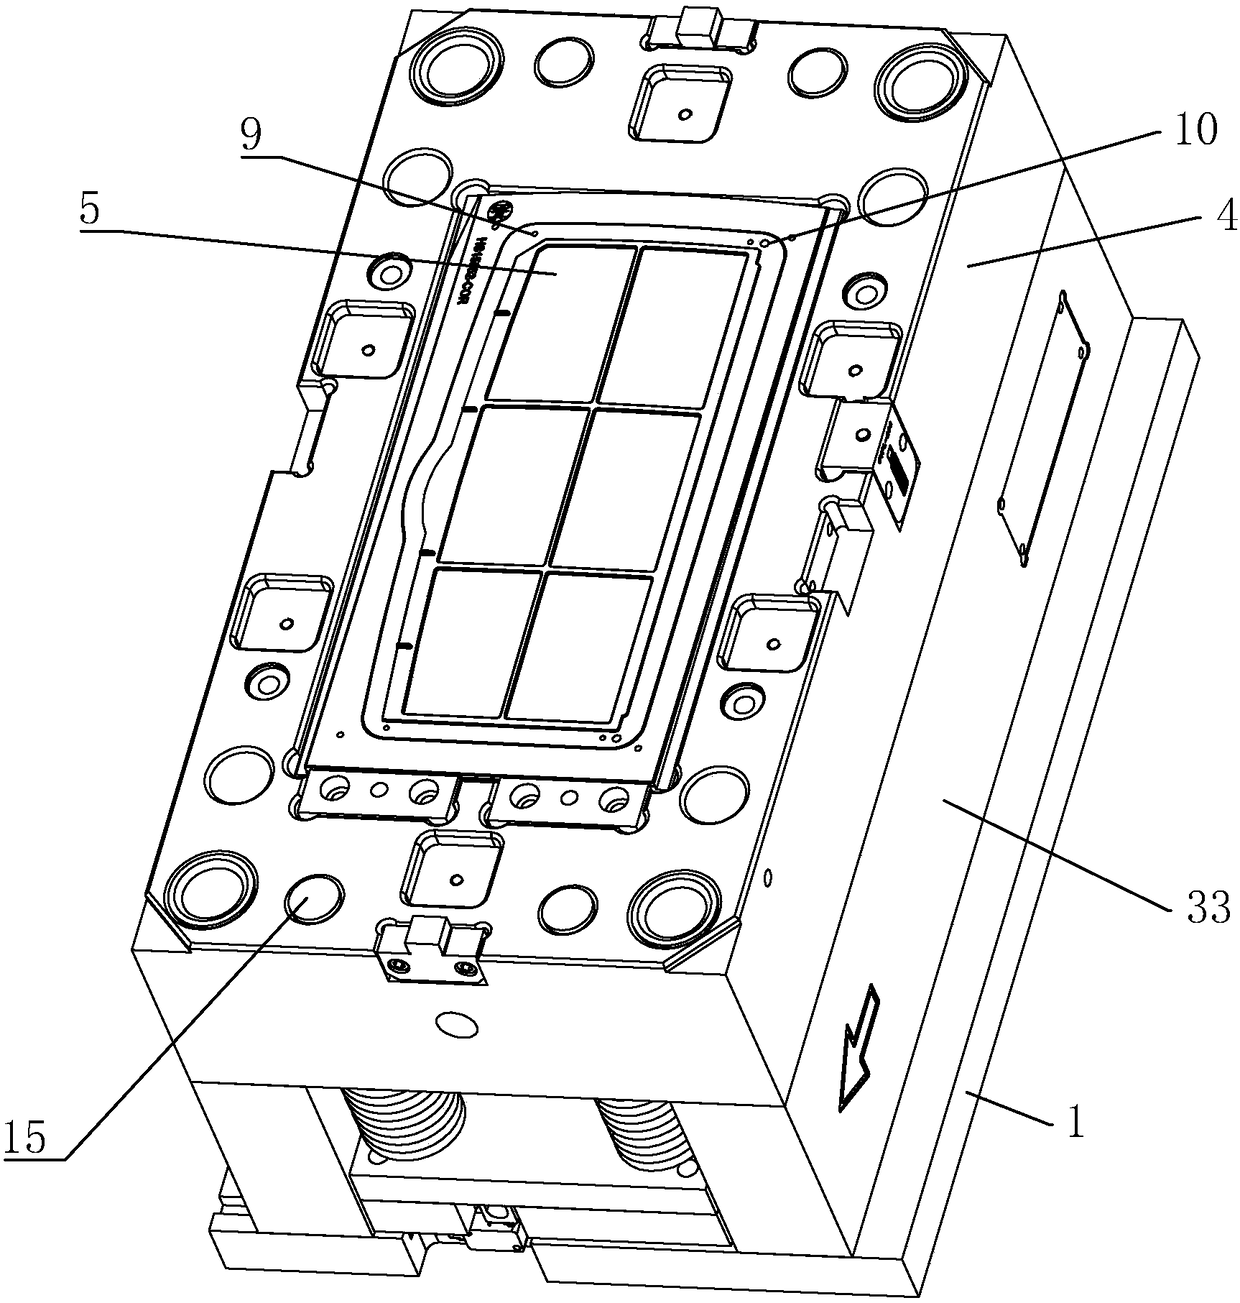 A filter injection mold